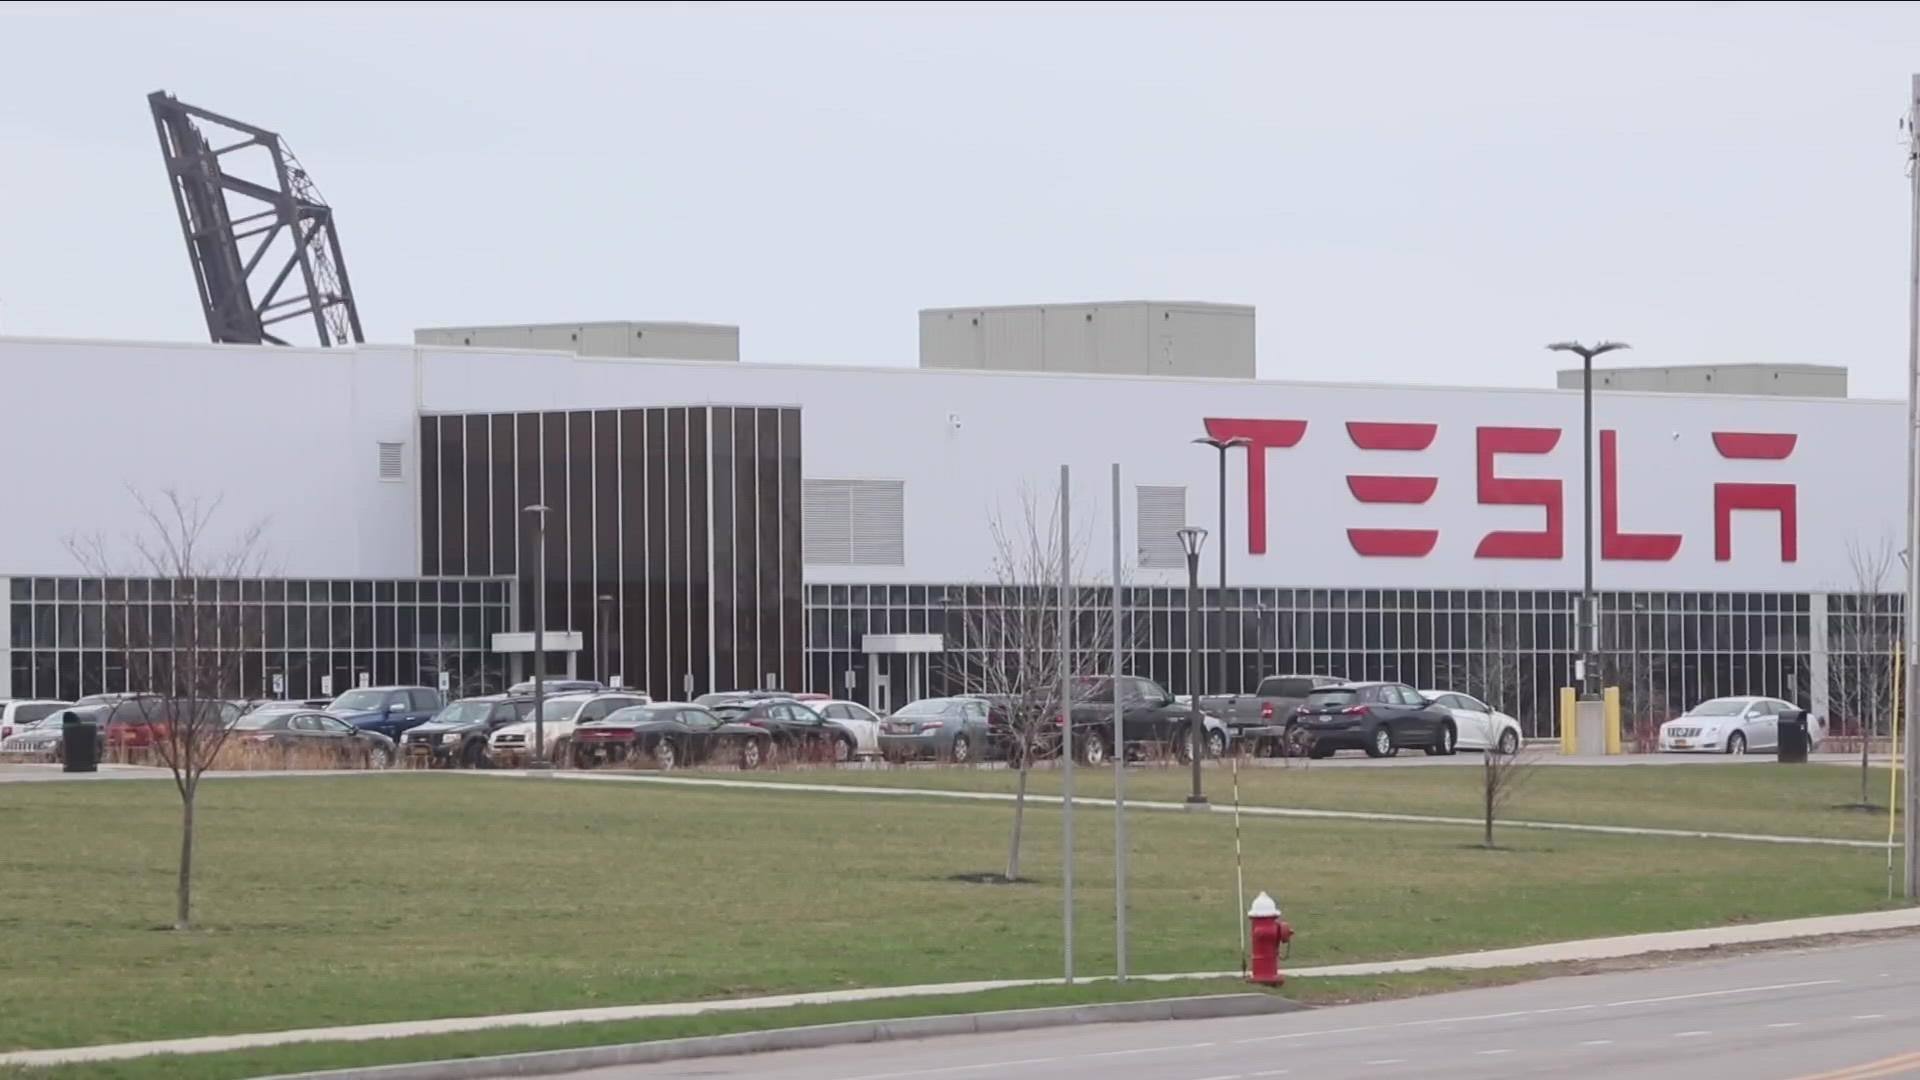 While the recent report did not say what type of jobs were created or in what business segment, Tesla has been diversifying its operations at the site since 2019.